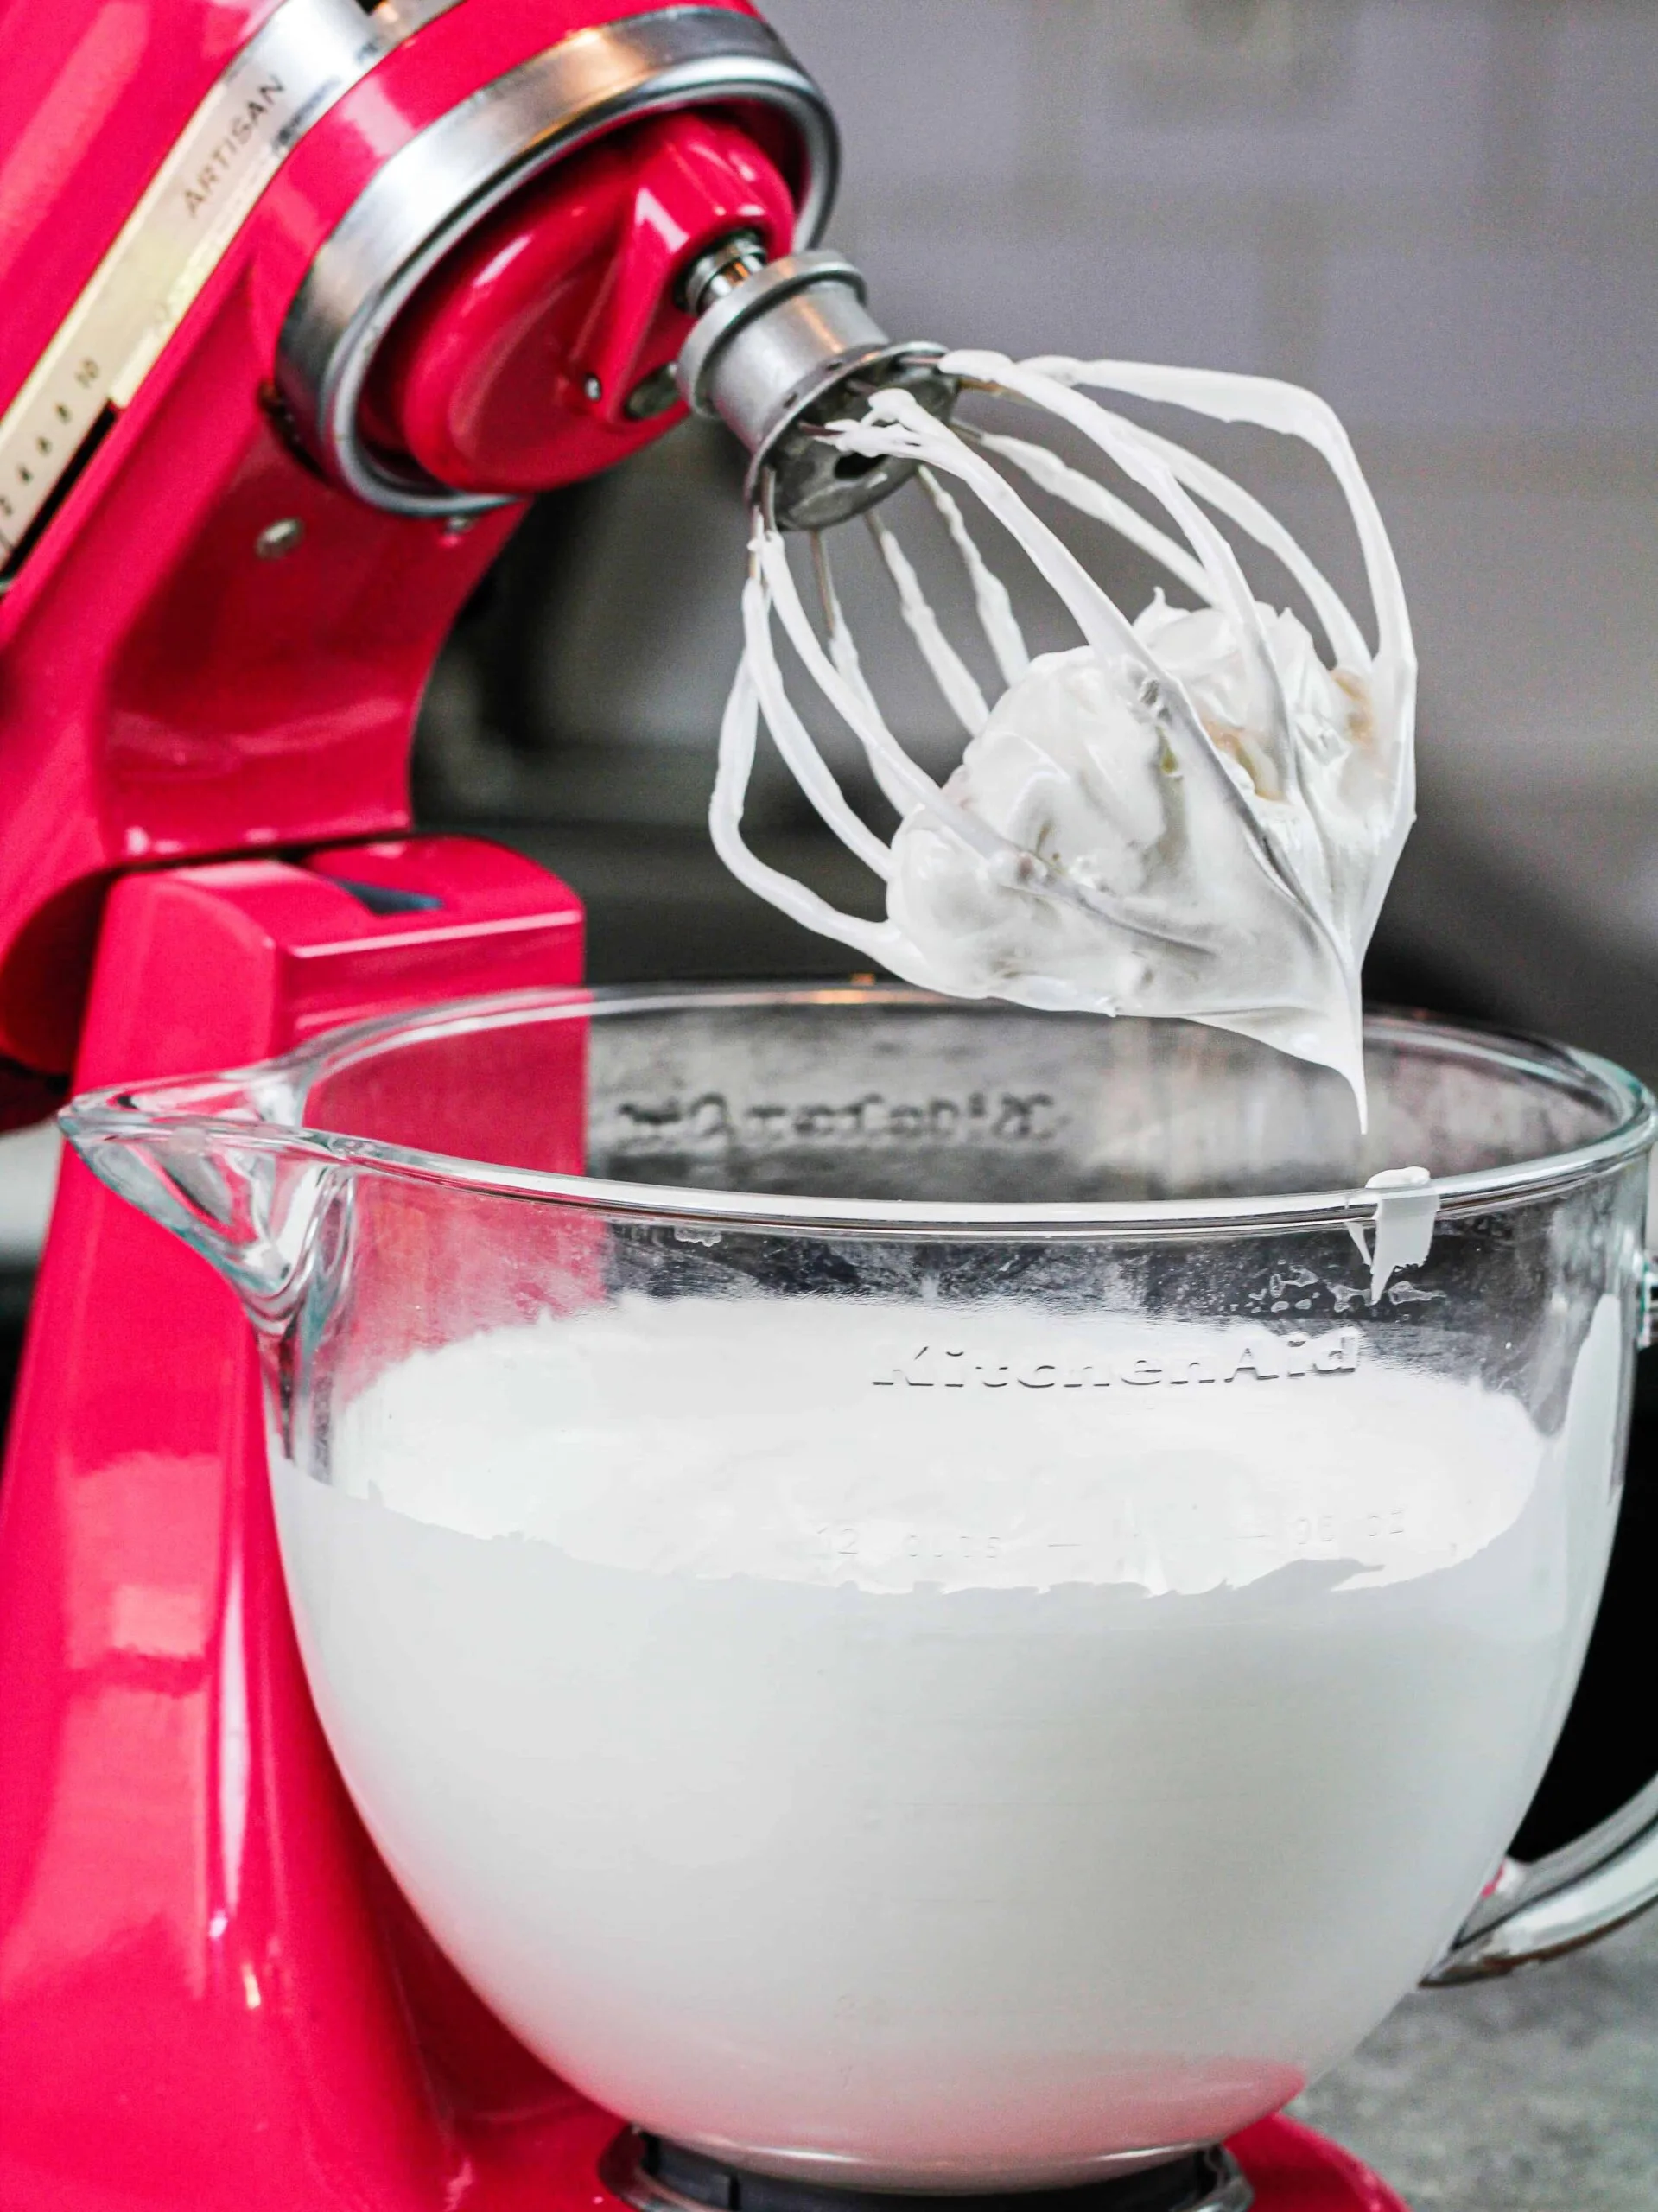 image of sugar free swiss meringue buttercream frosting being made in a kitchen aid mixer